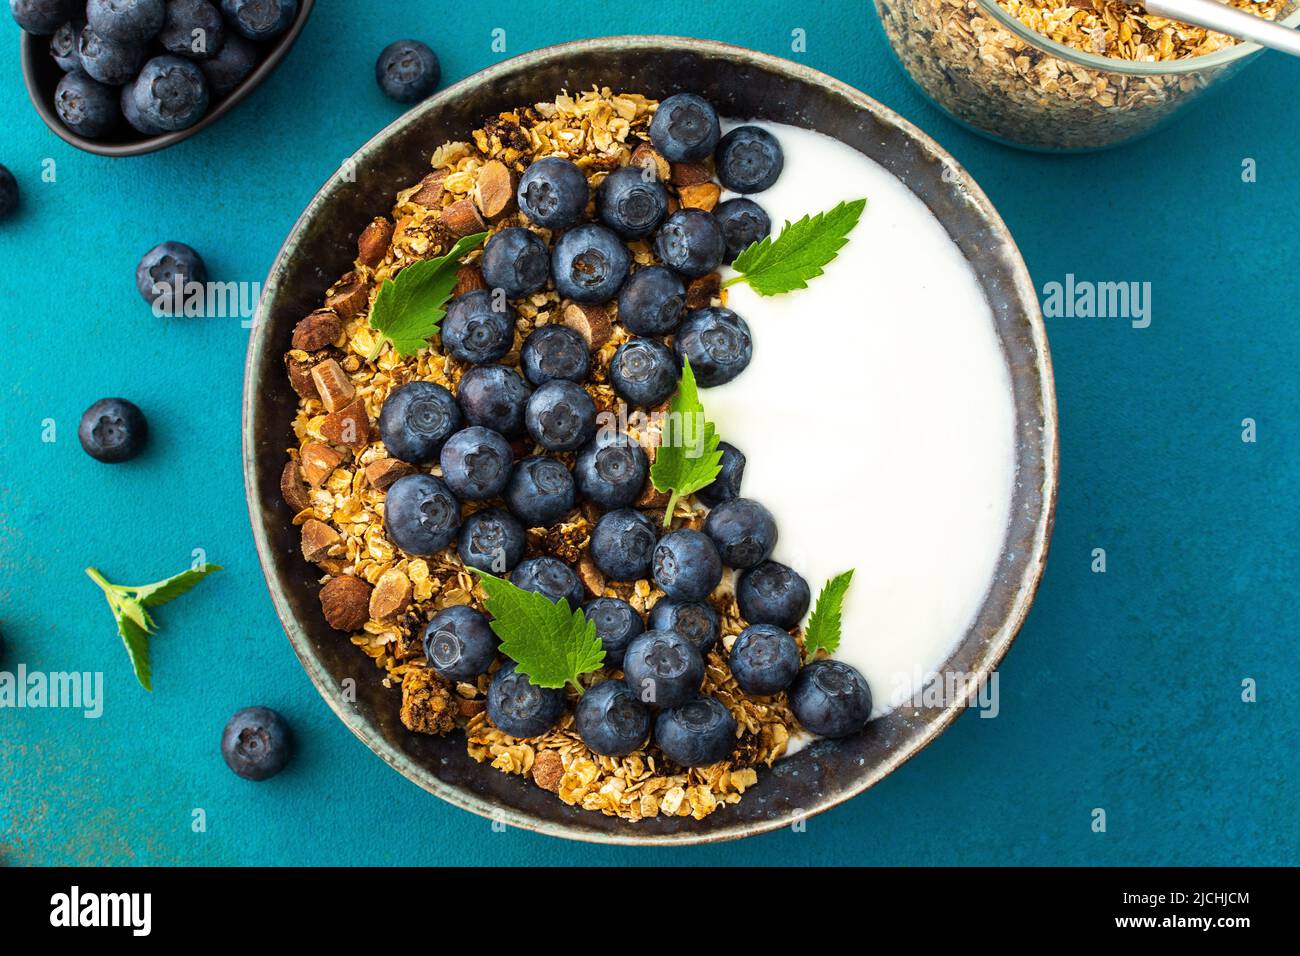 Homemade granola with yogurt, blueberries and mint leaves in a bowl on a turquoise background, delicious healthy breakfast Stock Photo